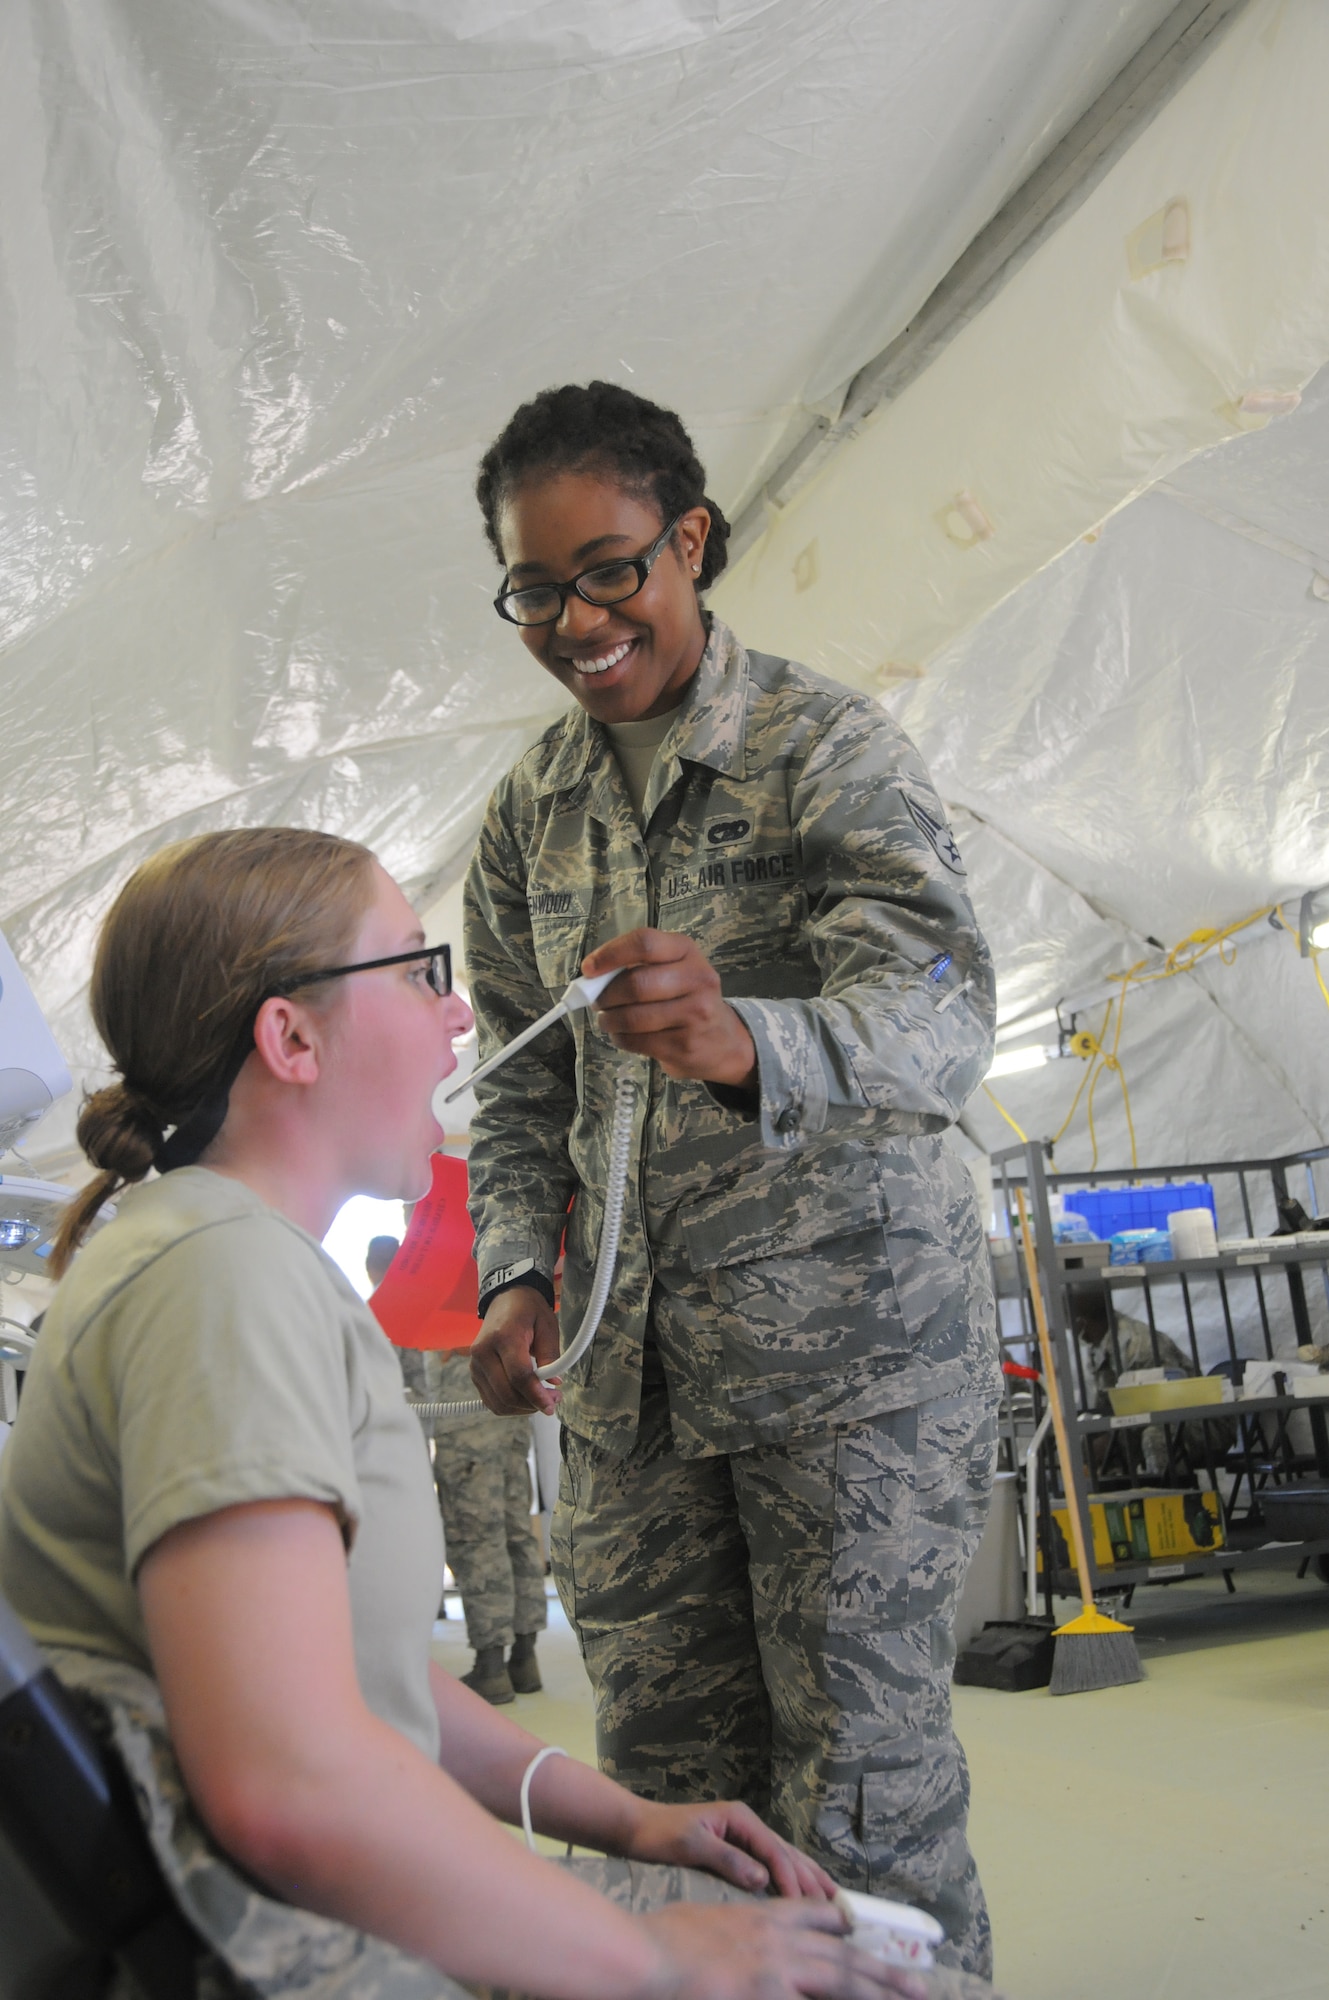 Senior Airman Latrice Greenwood, 445th Aeromedical Staging Squadron aerospace medical technician, checks and records the vital signs of a U.S. Air Force Academy cadet inside the medical triage tent at the Air Force Academy, Colorado Springs, July 23, 2019